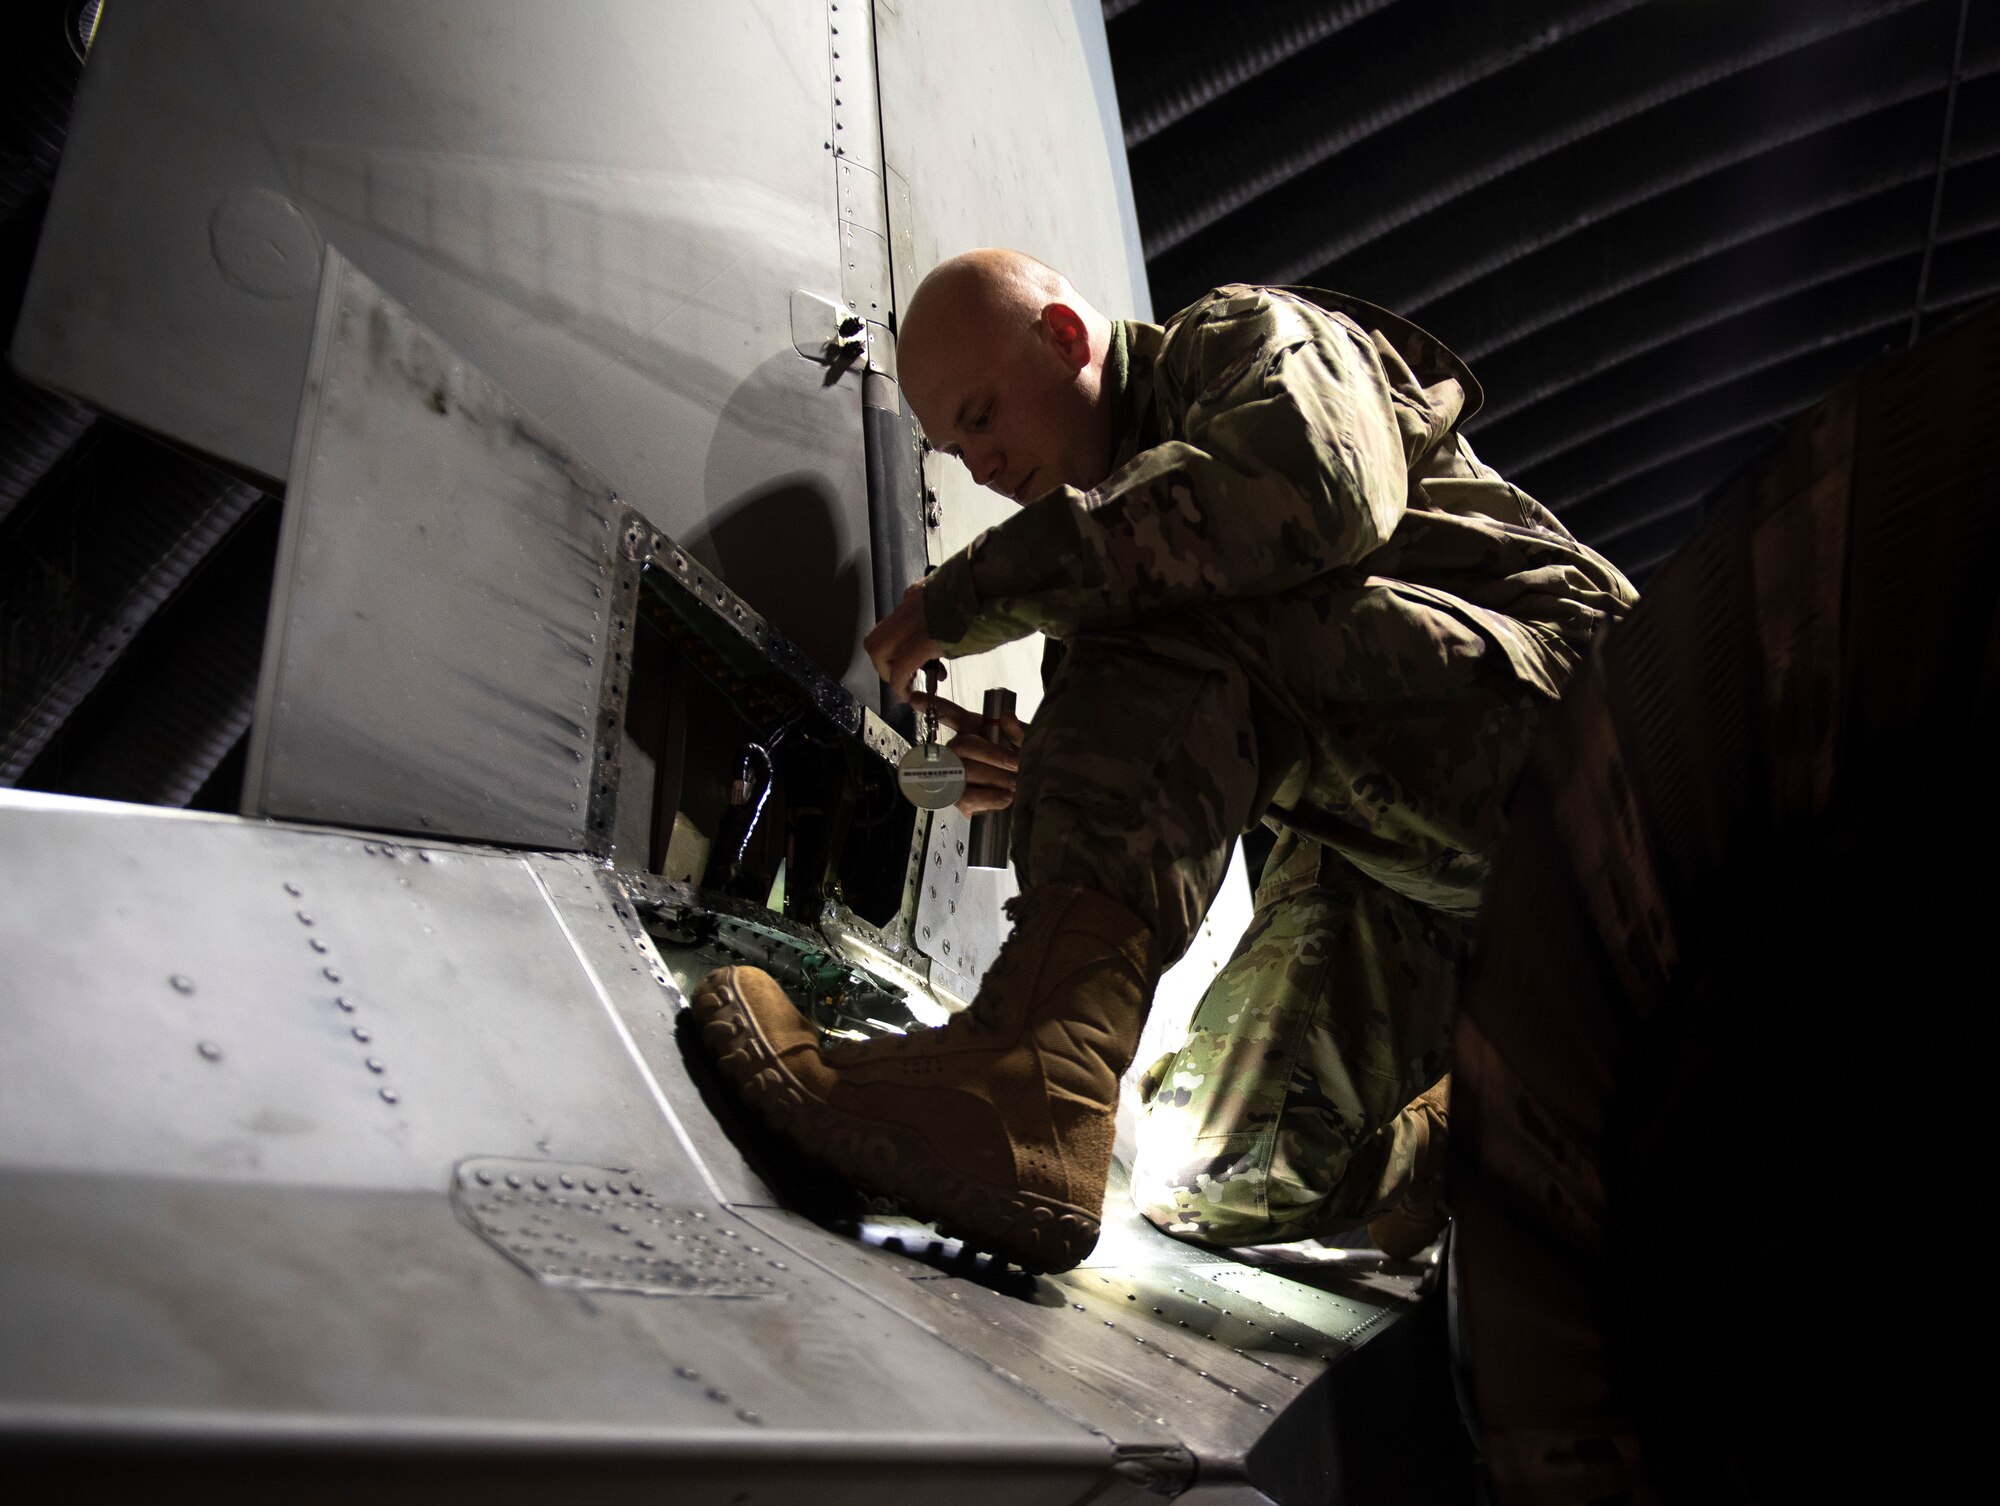 A quality assurance Airman assigned to the 48th Maintenance Group inspects an F-15 aircraft at Royal Air Force Lakenheath, England, April 30, 2020. The Liberty Wing’s quality assurance shop helped the 48th MXG earn the 2019 USAFE-AFAFRICA Clements McMullen Memorial Daedalian Weapon System Maintenance Trophy. (U.S. Air Force photo by Airman 1st Class Madeline Herzog)